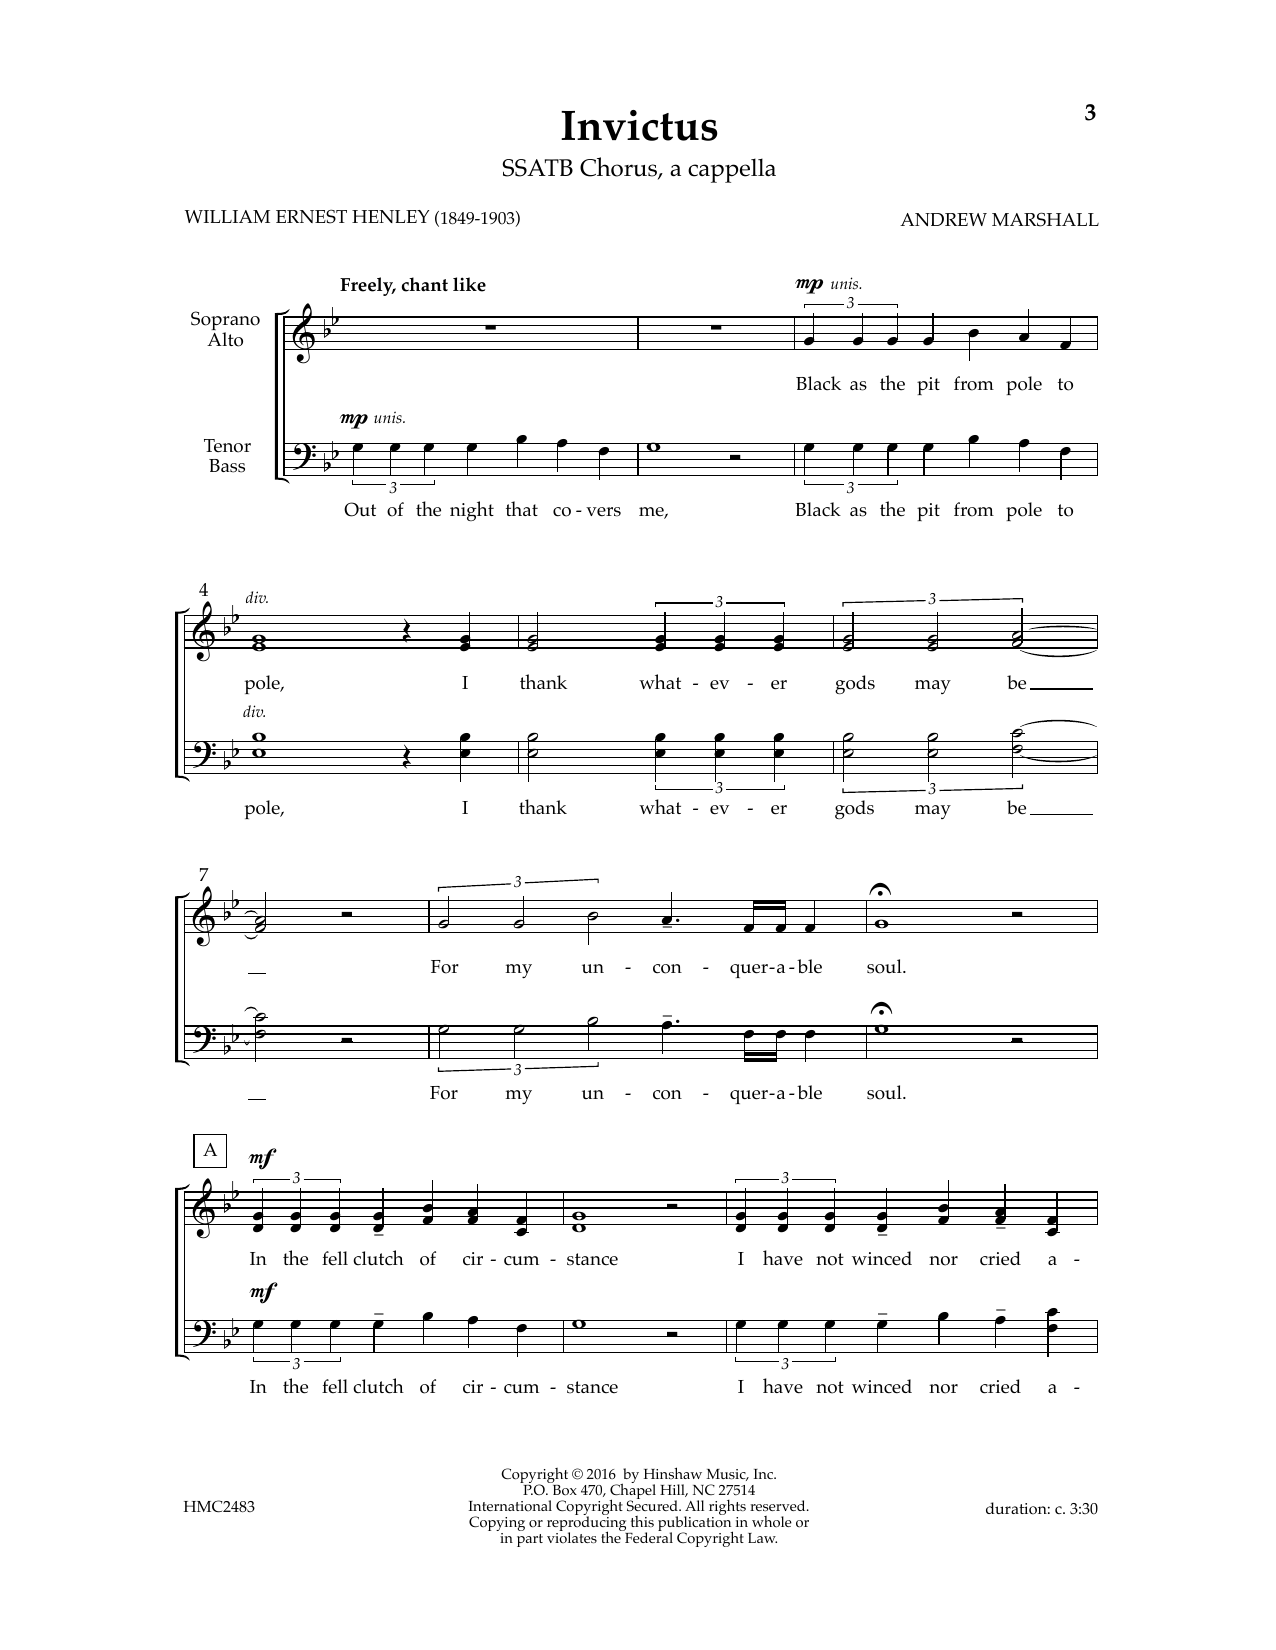 Download Andy Marshall Invictus Sheet Music